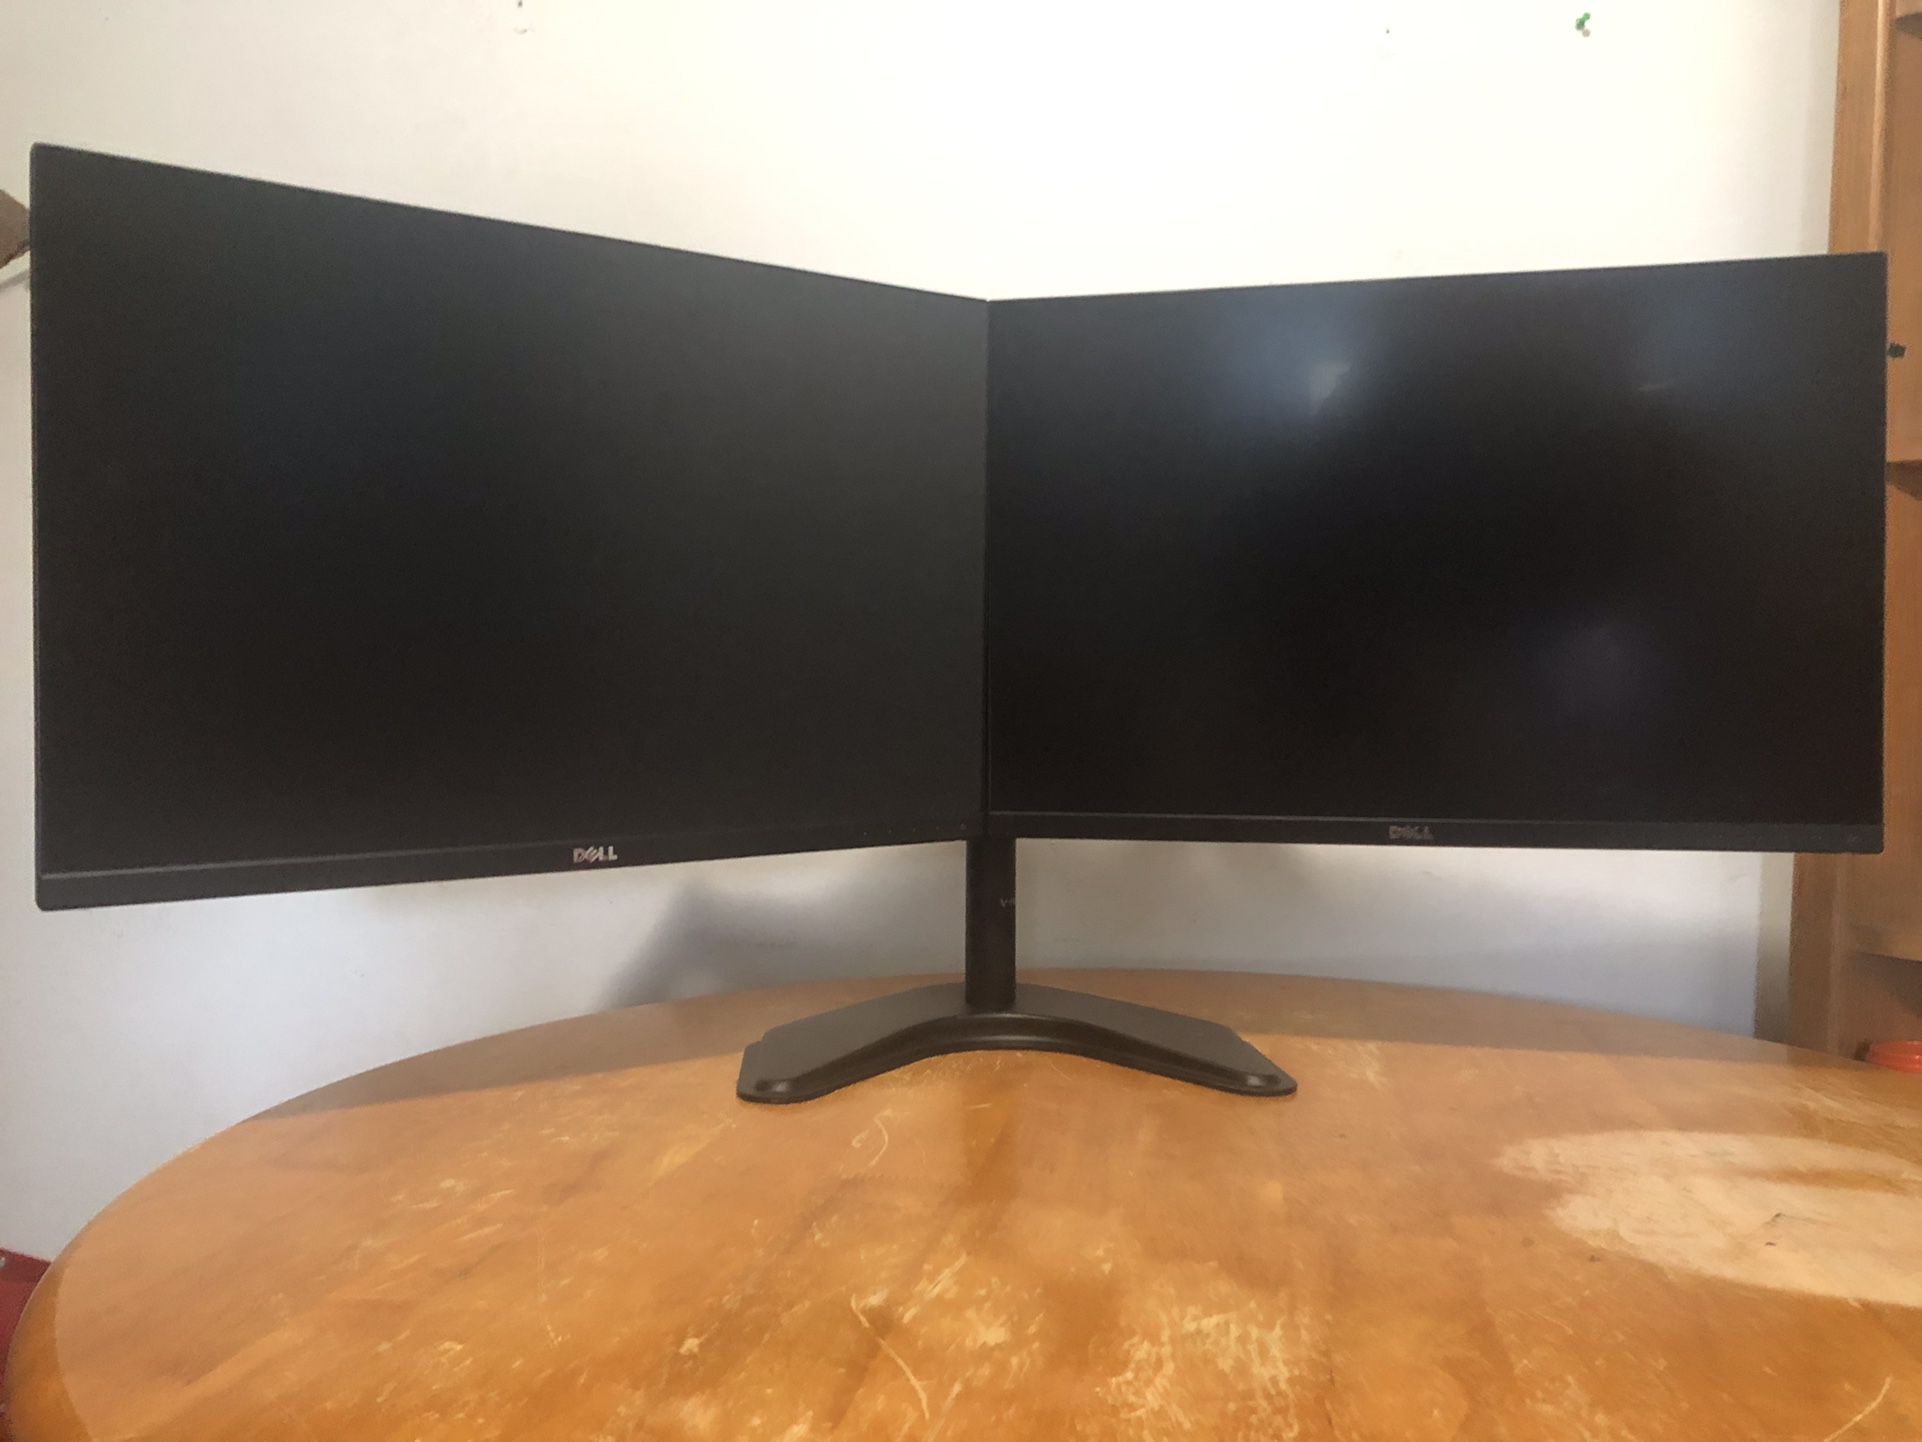 2 X Dell U2415 24” Monitors With Dual Arm Mount And DisplayPort Cables 